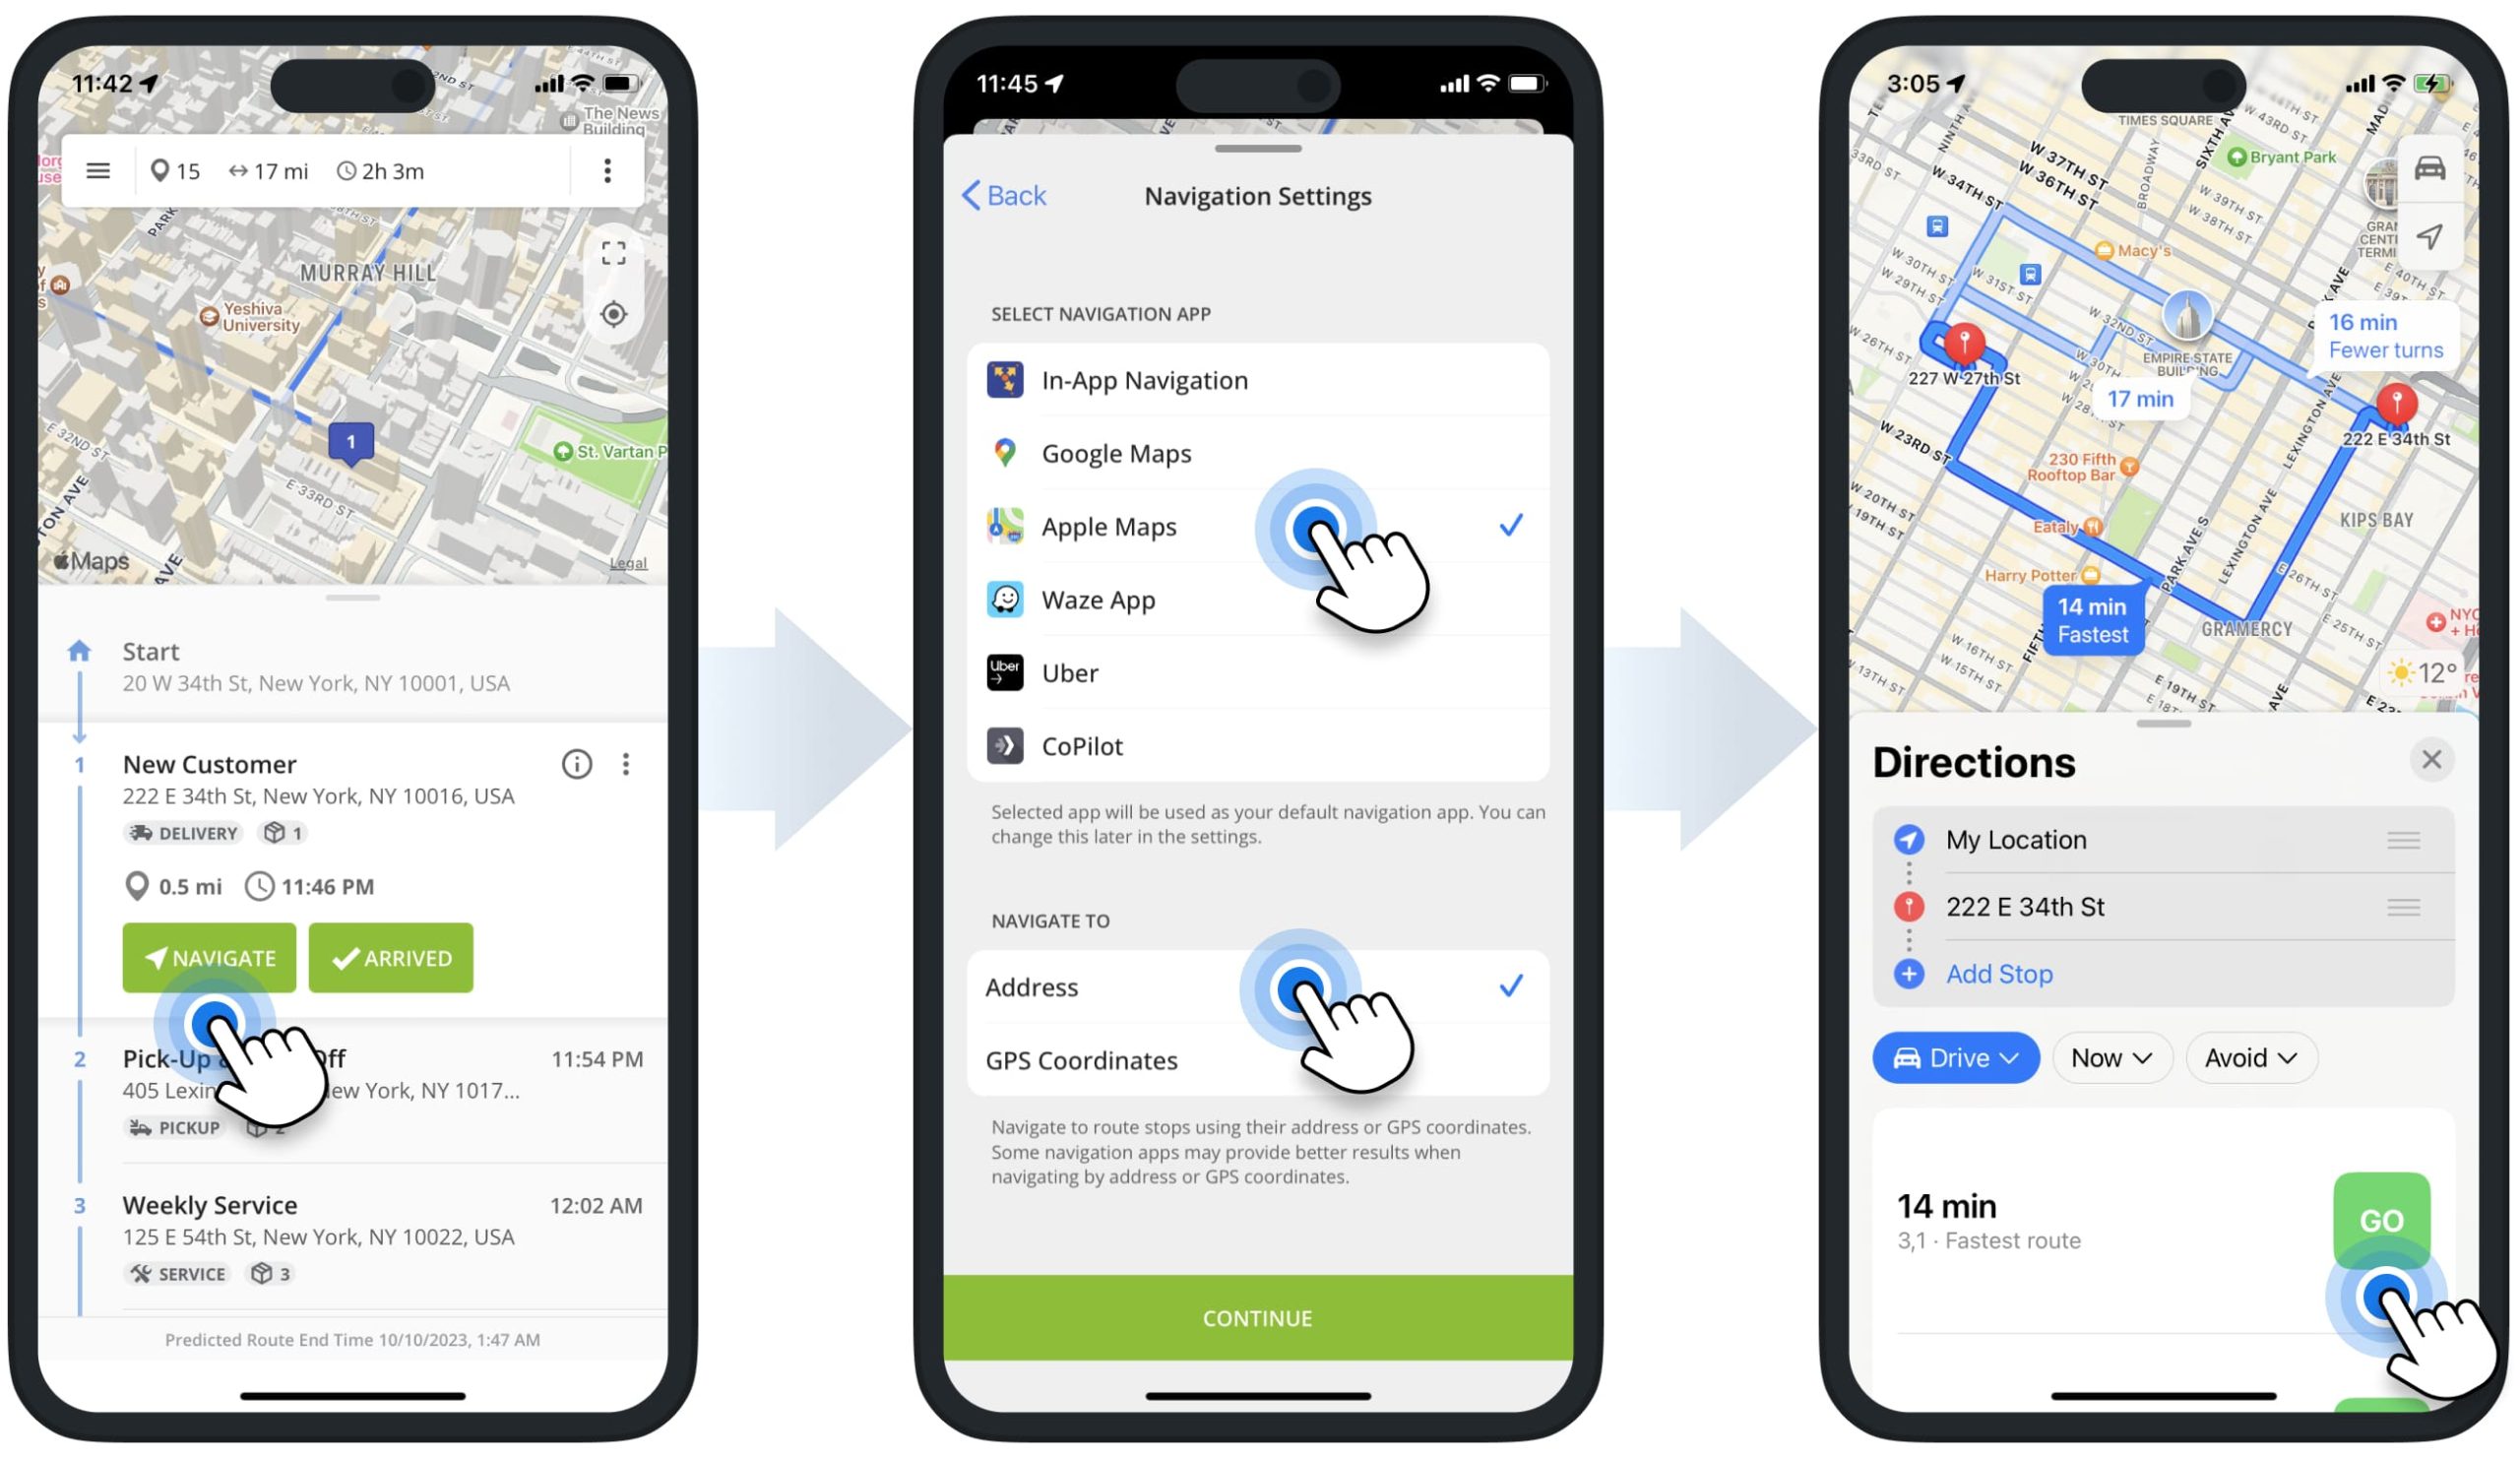 Apple Maps route planner GPS navigation for navigating Route4Me iOS Route Optimization app sequenced multi-stop routes.